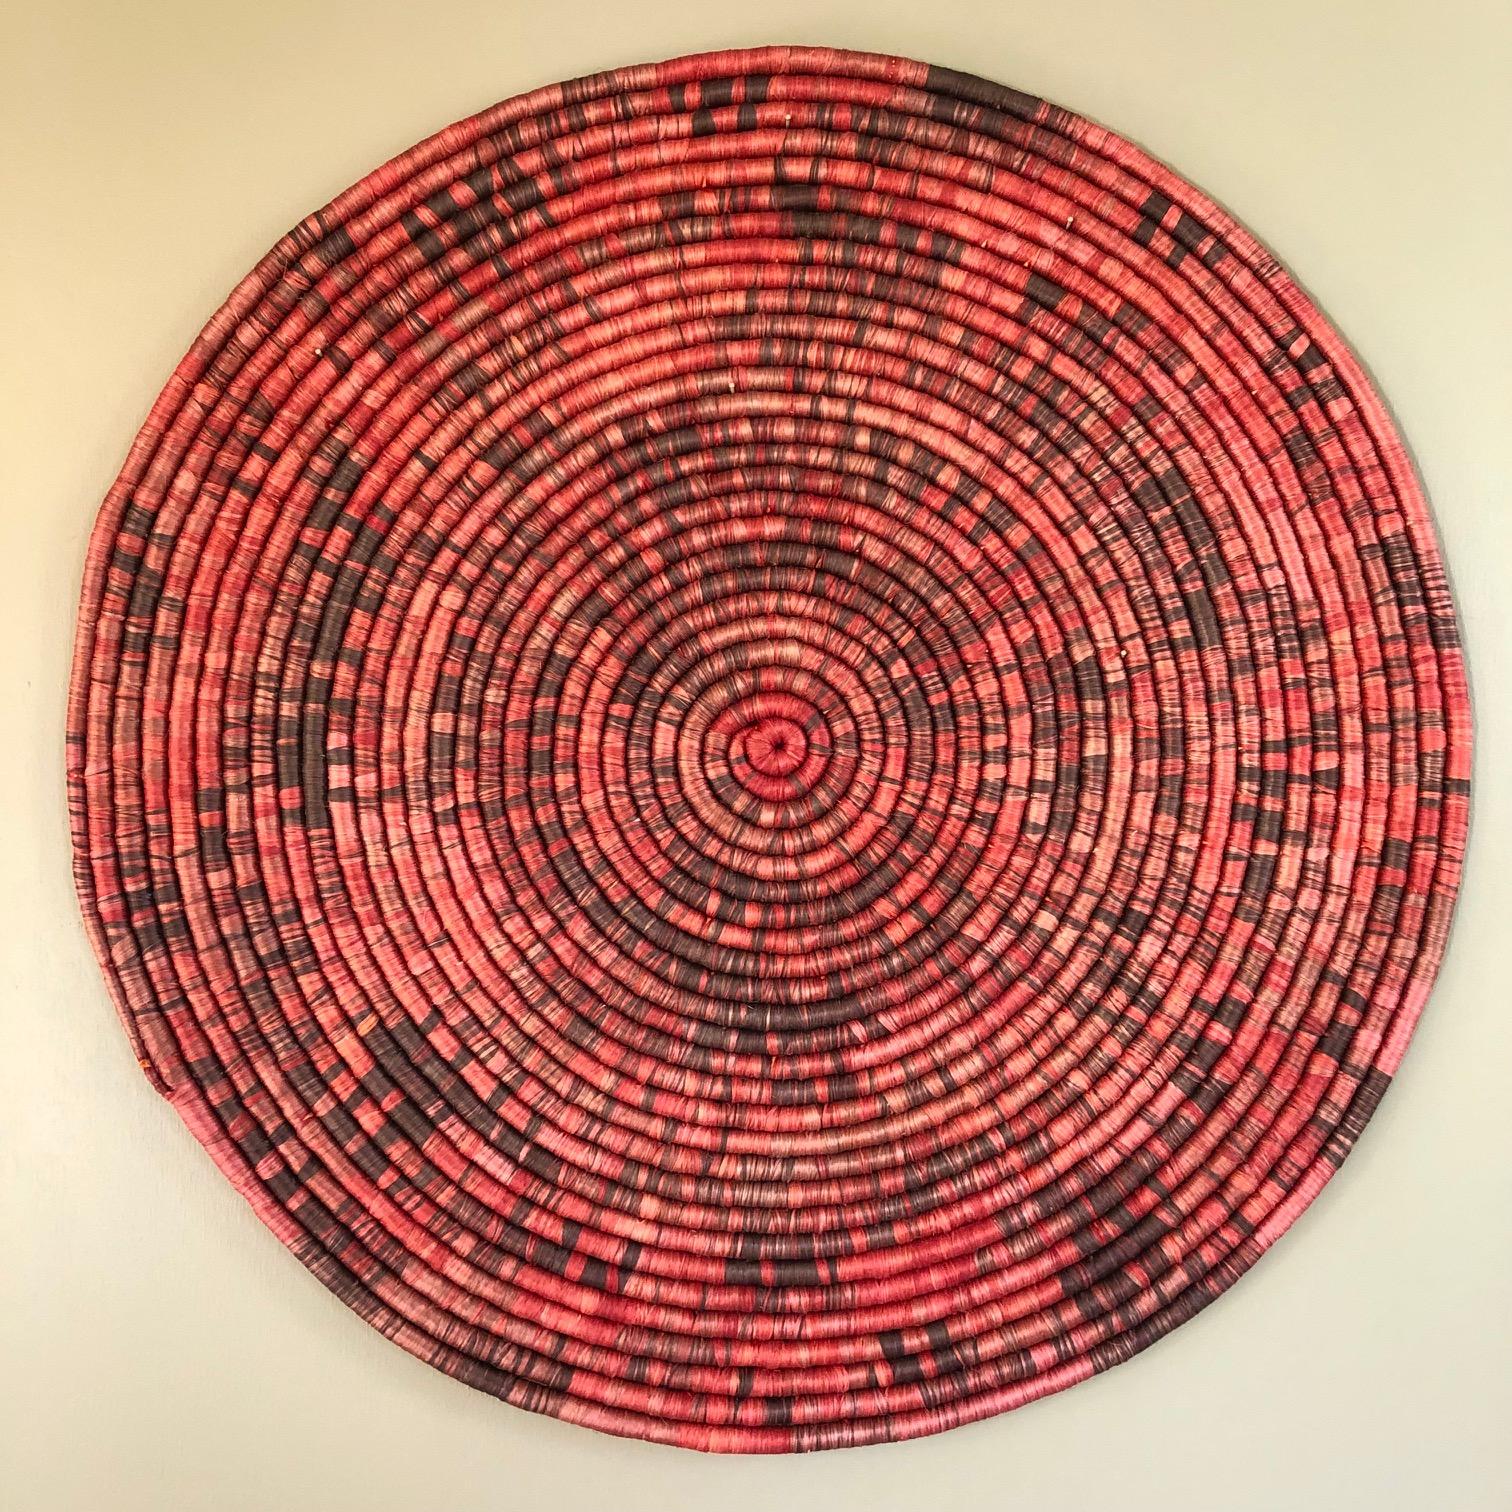 Venus y Loco, Red Spiral Rug, 2021, combed natural agave fiber, dyed with Mexican logwood, 33.75” diameter x 1”